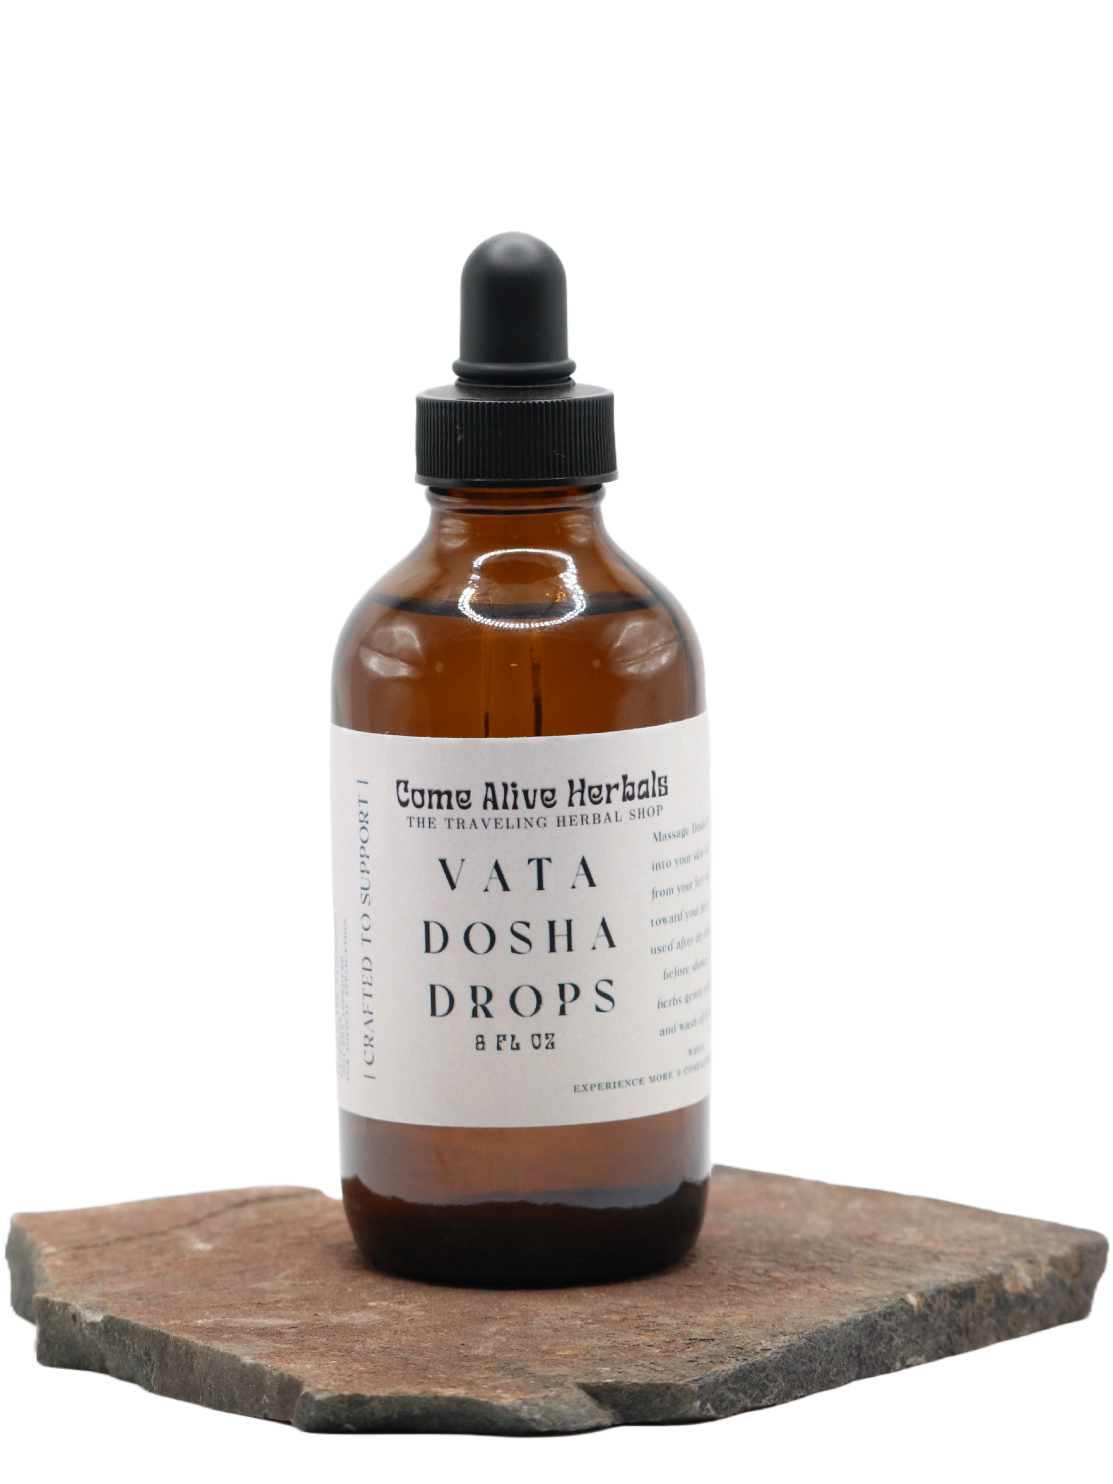 Vata Dosha Drops by Come Alive Herbals - Lotus and Willow